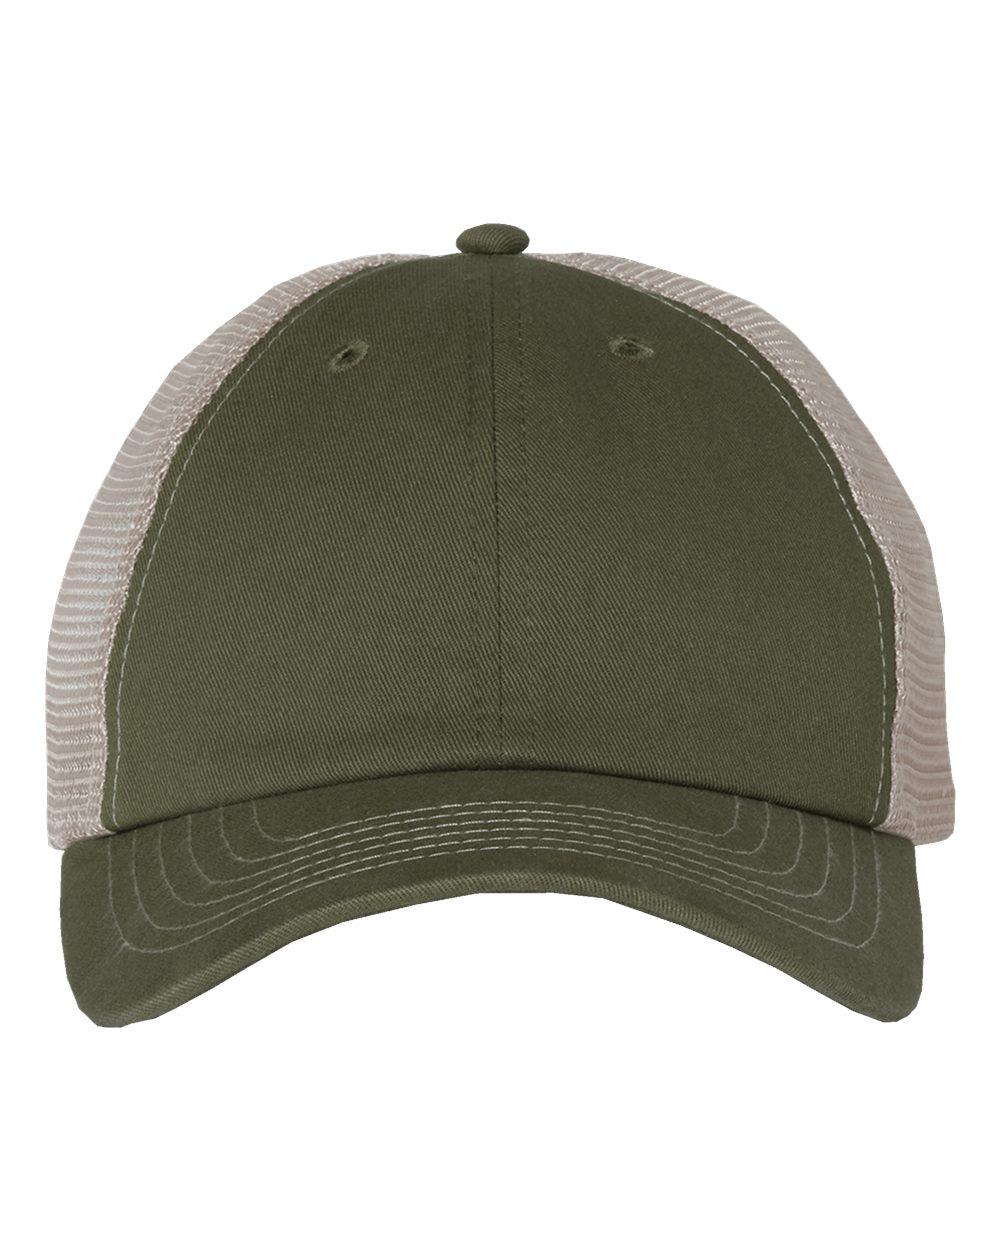 Baseball Hat - Adjustable - Custom Engraved Leather Patch Available